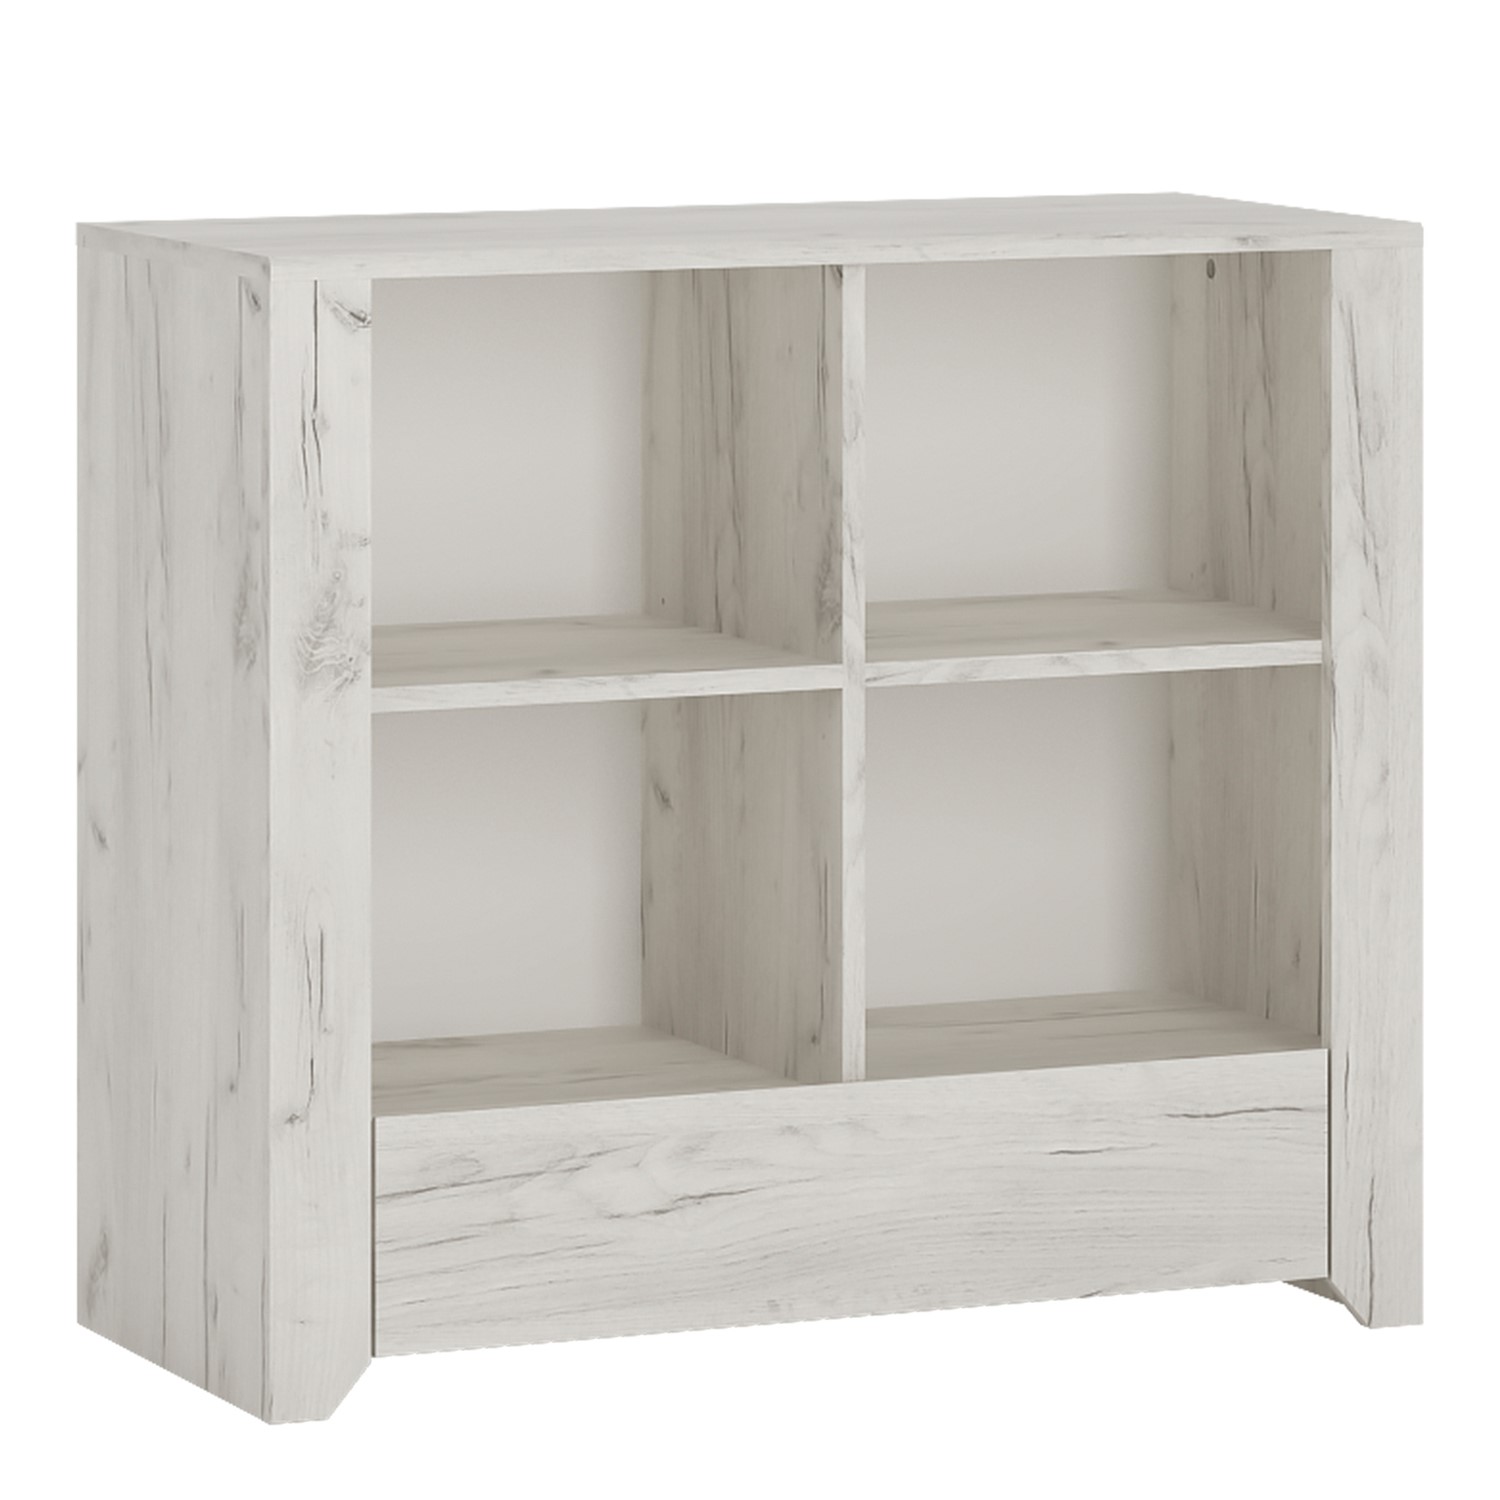 Photo of Low white oak bookcase with drawer - angel